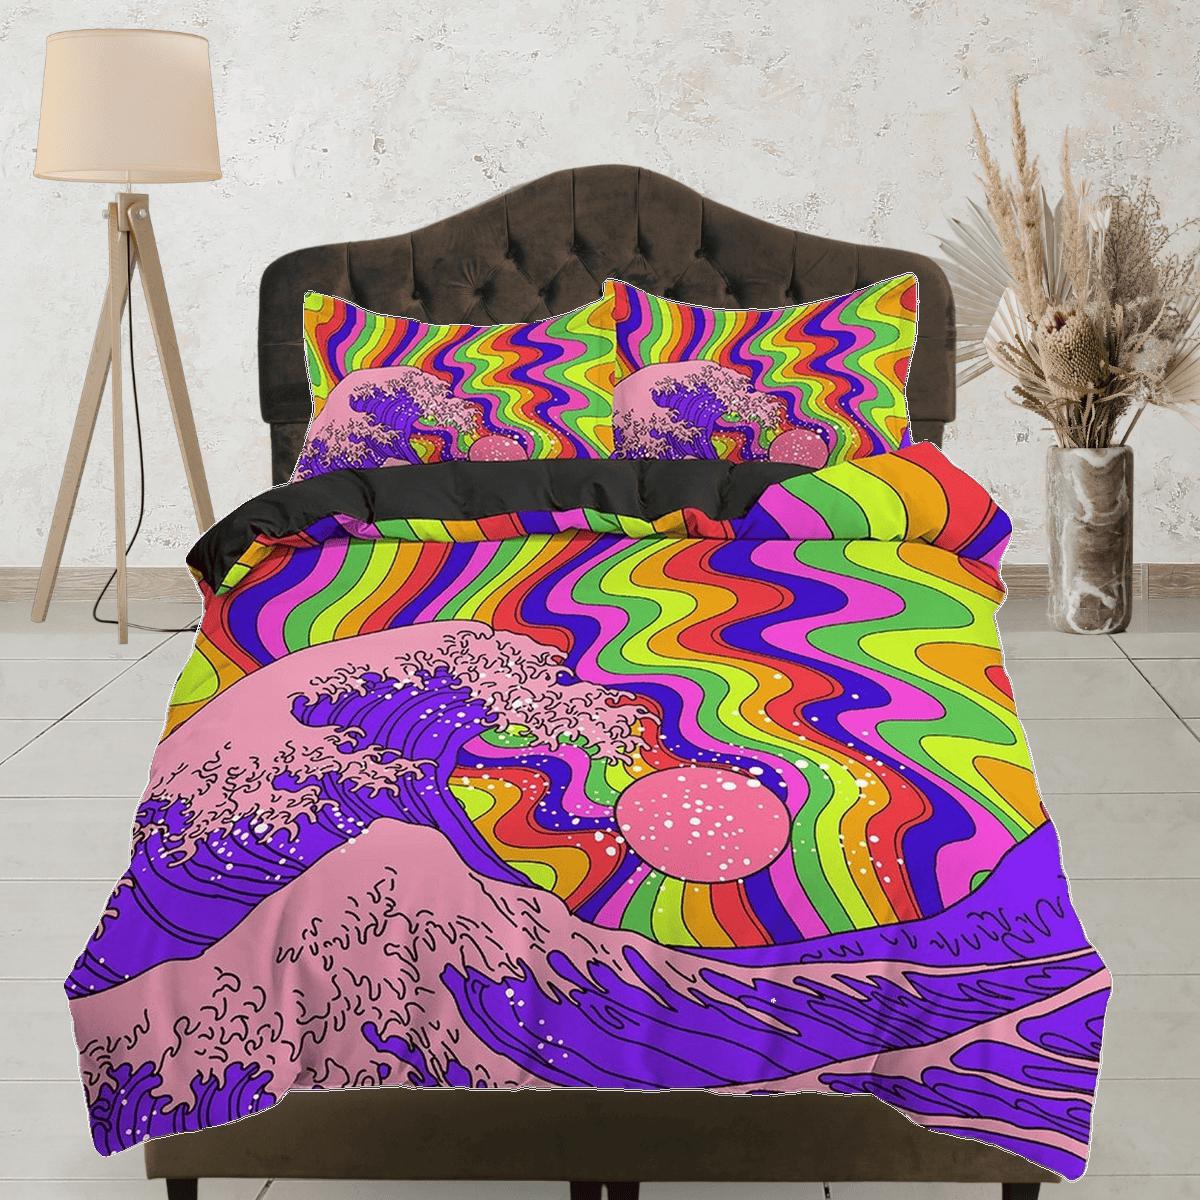 daintyduvet The Great Wave Bedding, Trippy Psychedelic Bedding Retro Vaporwave Hippie Bedding, Aesthetic Duvet Cover King Queen Full Twin Double Single